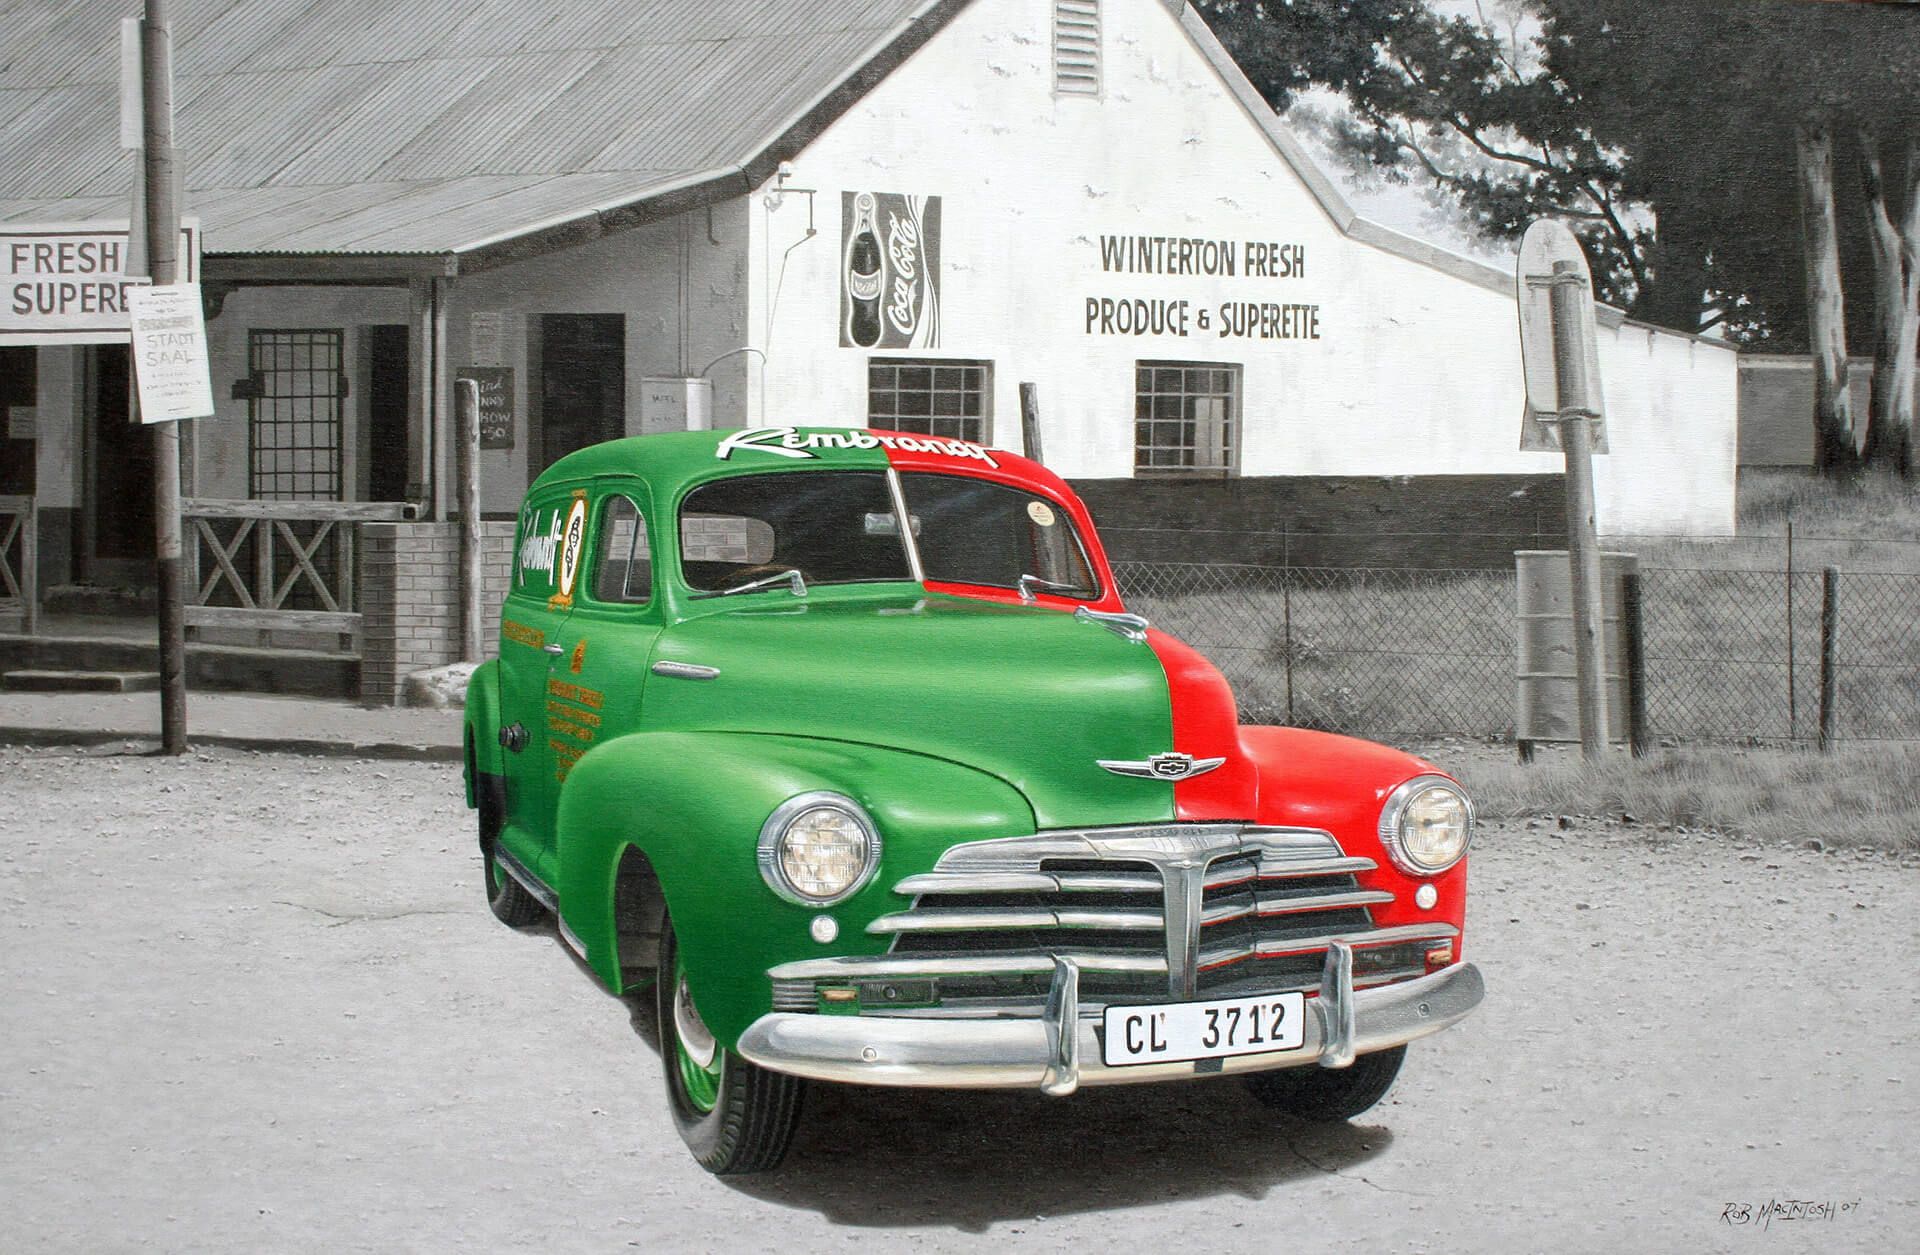 Photorealistic painting of a green and red car on a black and white background